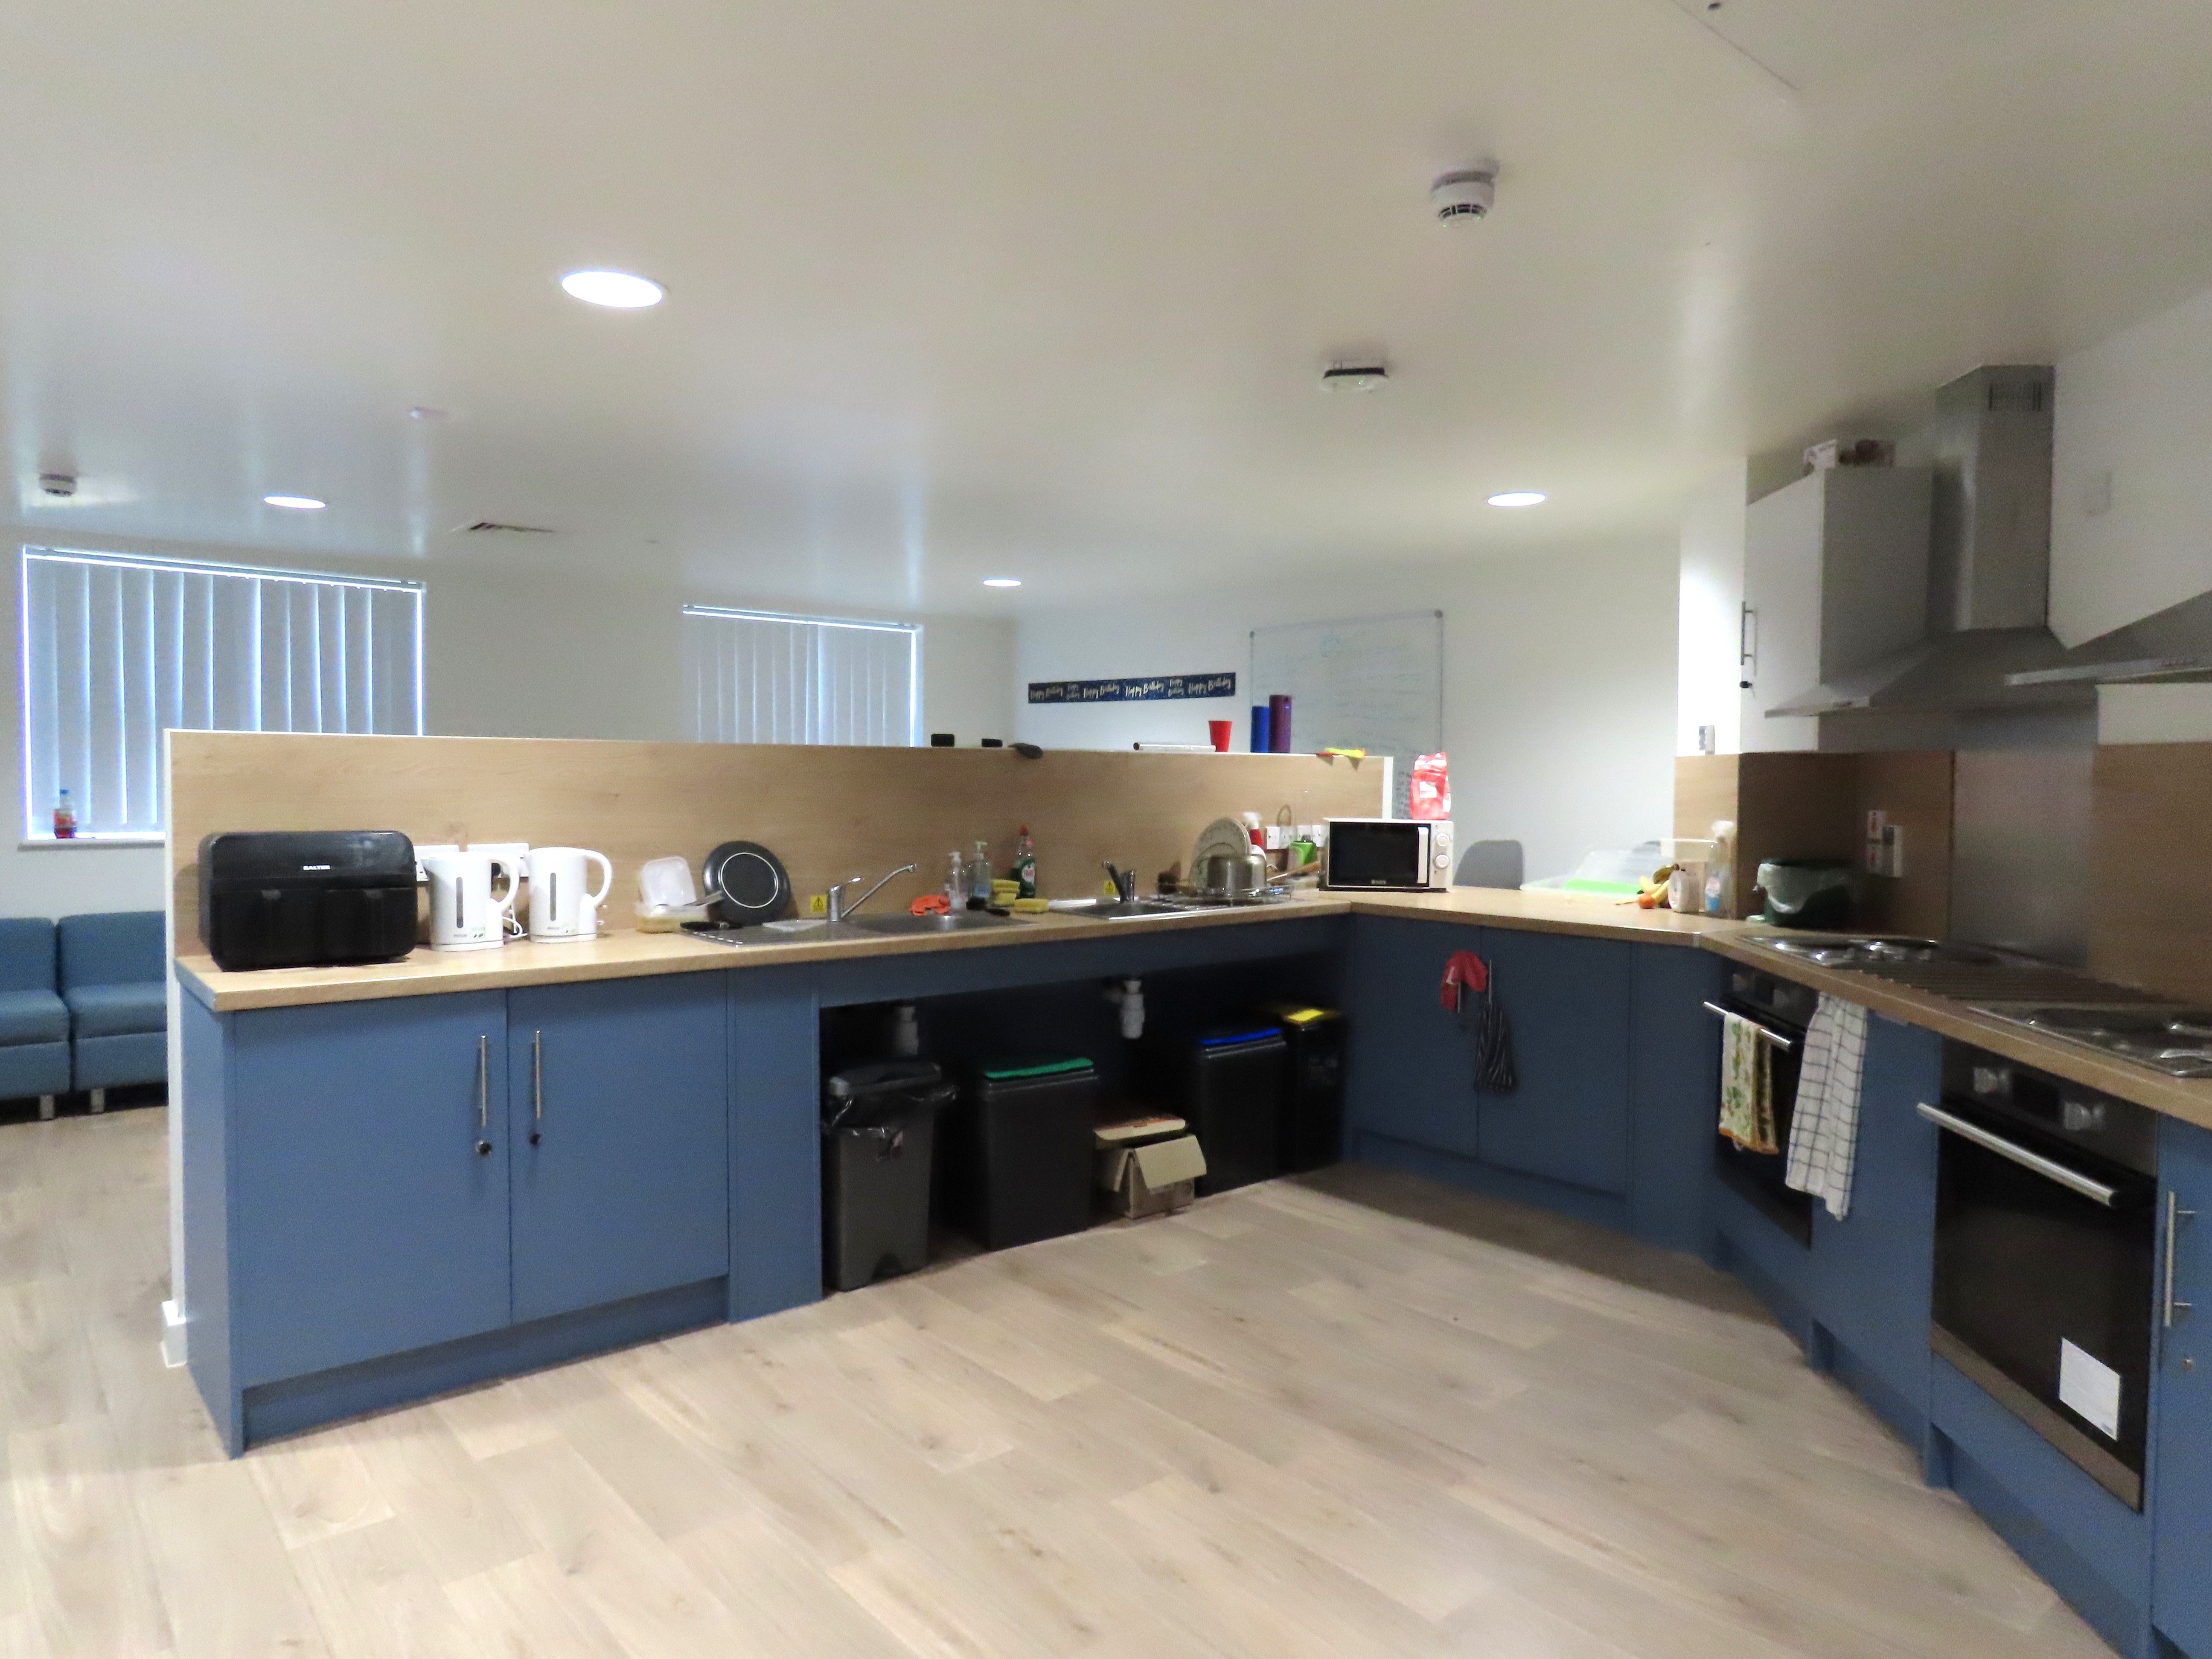 A view of a shared student kitchen